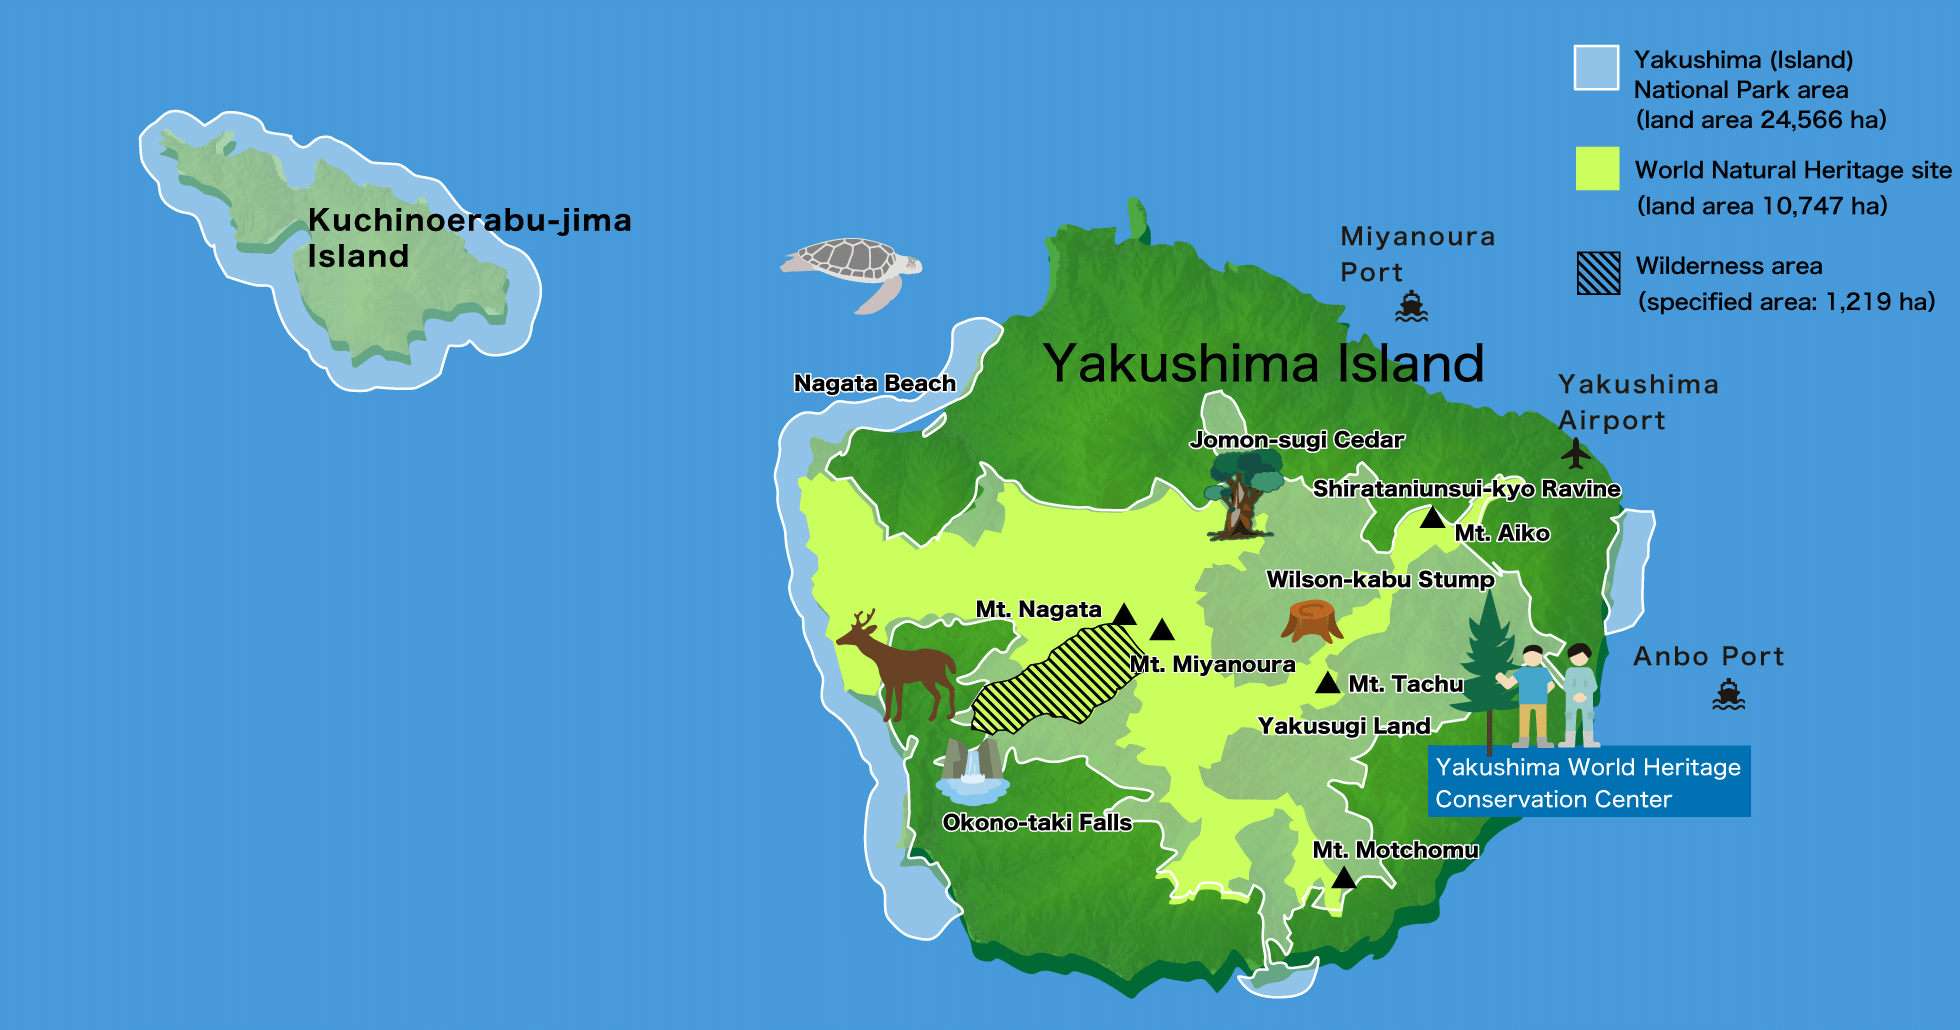 Yakushima National Park has a land area of 24,566ha. Approximately 42% of Yakushima Island (20,989ha) and the entire area of Kuchinoerabu-jima Island (3,577ha) are designated as a park. Furthermore, the sea area around Yakushima Island and Kuchinoerabu-jima Island is also designated as part of the park, and covers an area of 7,987ha. The park covers a total area (land and sea) of 32,553ha. Approximately 39% of the land area of Yakushima National Park (10,747ha, encompassing the Special Protection Zone and part of the Type 1 Special Zone) is registered as a World Natural Heritage Site. A further 1,219ha is designated as Wilderness Area, an area largely undisturbed and in pristine condition. Mt. Miyanoura (Kyushu region's highest peak at 1,936m above sea level) is located in the center of Yakushima, a nearly circular island. The largest confirmed Yakusugi Cedar, the Jomon-sugi Cedar, is located 4-5 hour walk (approximately 6km) northeast of Mt. Miyanoura. The Shirataniunsui-kyo Ravine is located a further 6-7 hour walk (approximately 12km) northeast at an altitude of 600-1,050m, and provides visitors with a primeval forest with thick moss and a mountain stream carved out of granite. Yakusugi Land with its numerous Yakusugi Cedars for viewing is approximately one hour from Anbo Port, the sea gateway to the eastern area of Yakushima Island, at an altitude of 1,000-1,300m. Okono-taki Falls, with a drop of 88m, is one of Japan's Top 100 Waterfalls, is located in the southwestern part of the island near the sea. Nagata Beach, where sea turtles can be observed laying their eggs between May and July, is located in the northwestern part of the island. The Yakushima World Heritage Conservation Center is located on the hilly east-southeast side of the island, approximately 30 minutes from Miyanoura Port, 10 minutes from Anbo Port, and 15 minutes from Yakushima Airport (Koseda).